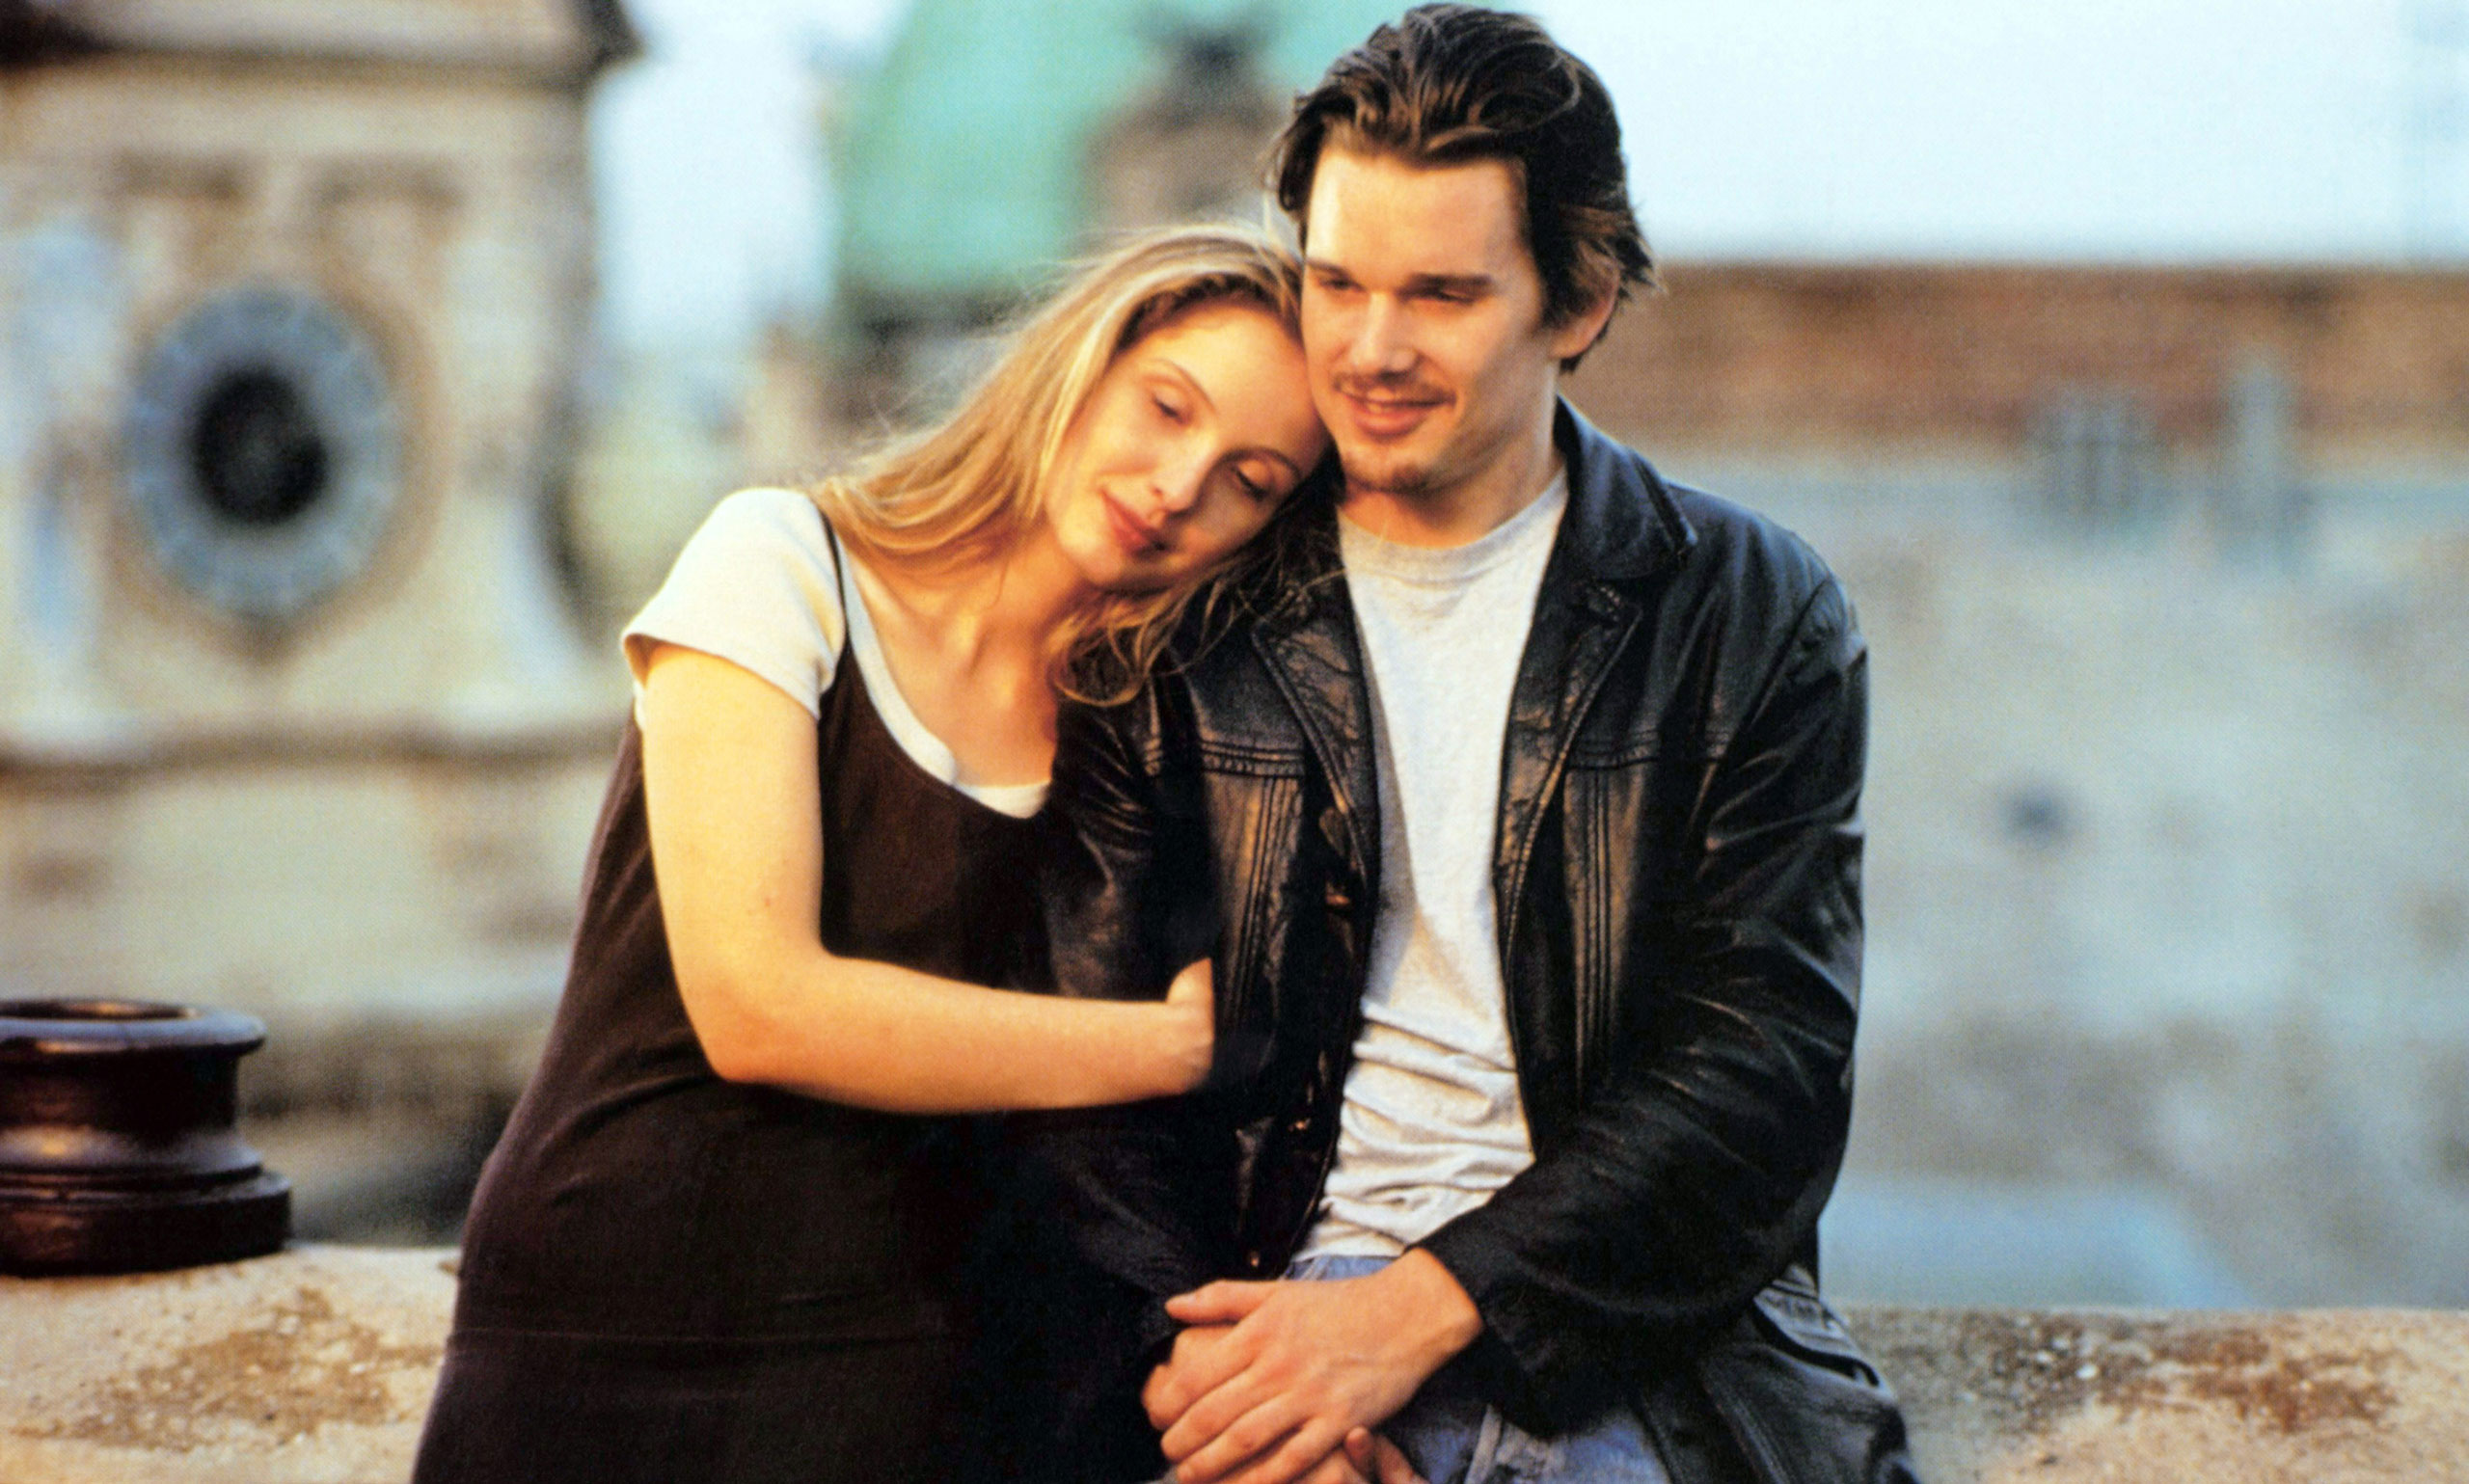 Julie Delpy and Ethan Hawke in <i>Before Sunrise</i>. (Columbia Pictures/Everett Collection)